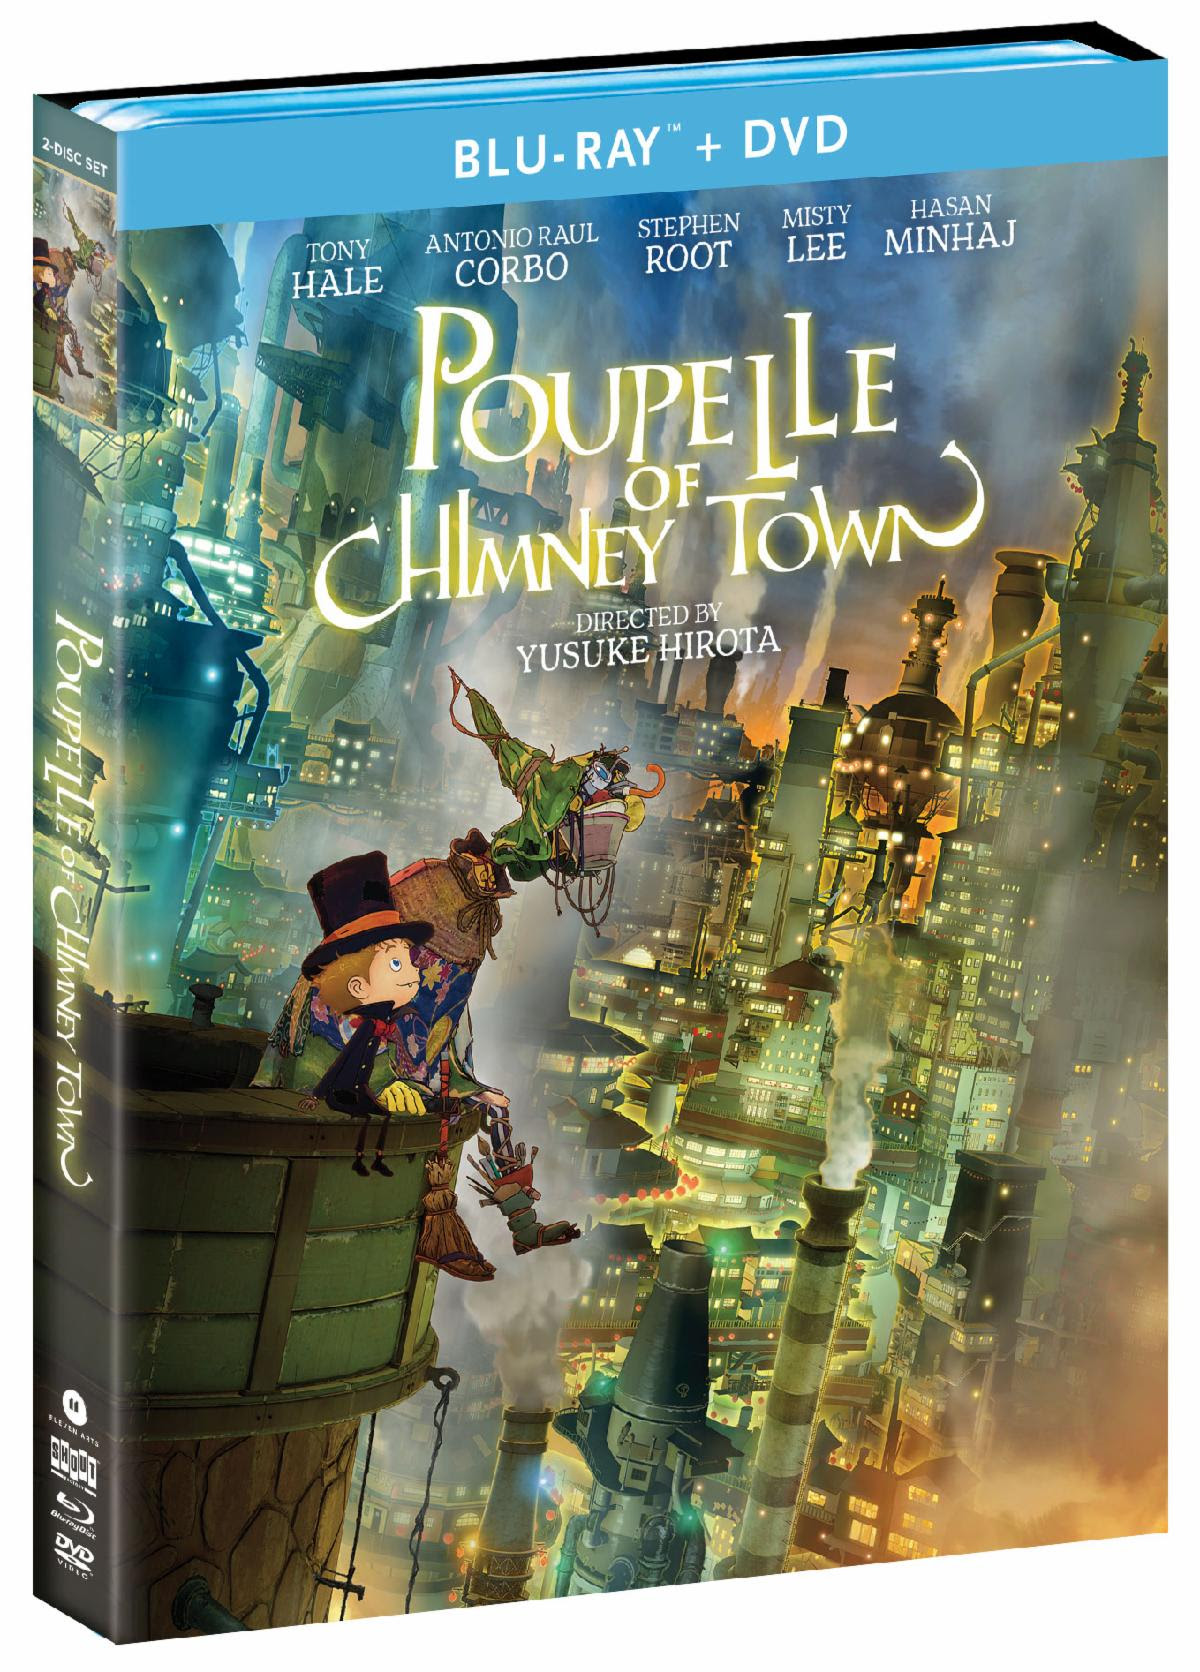 Poupelle of Chimney Town Blu-ray + DVD